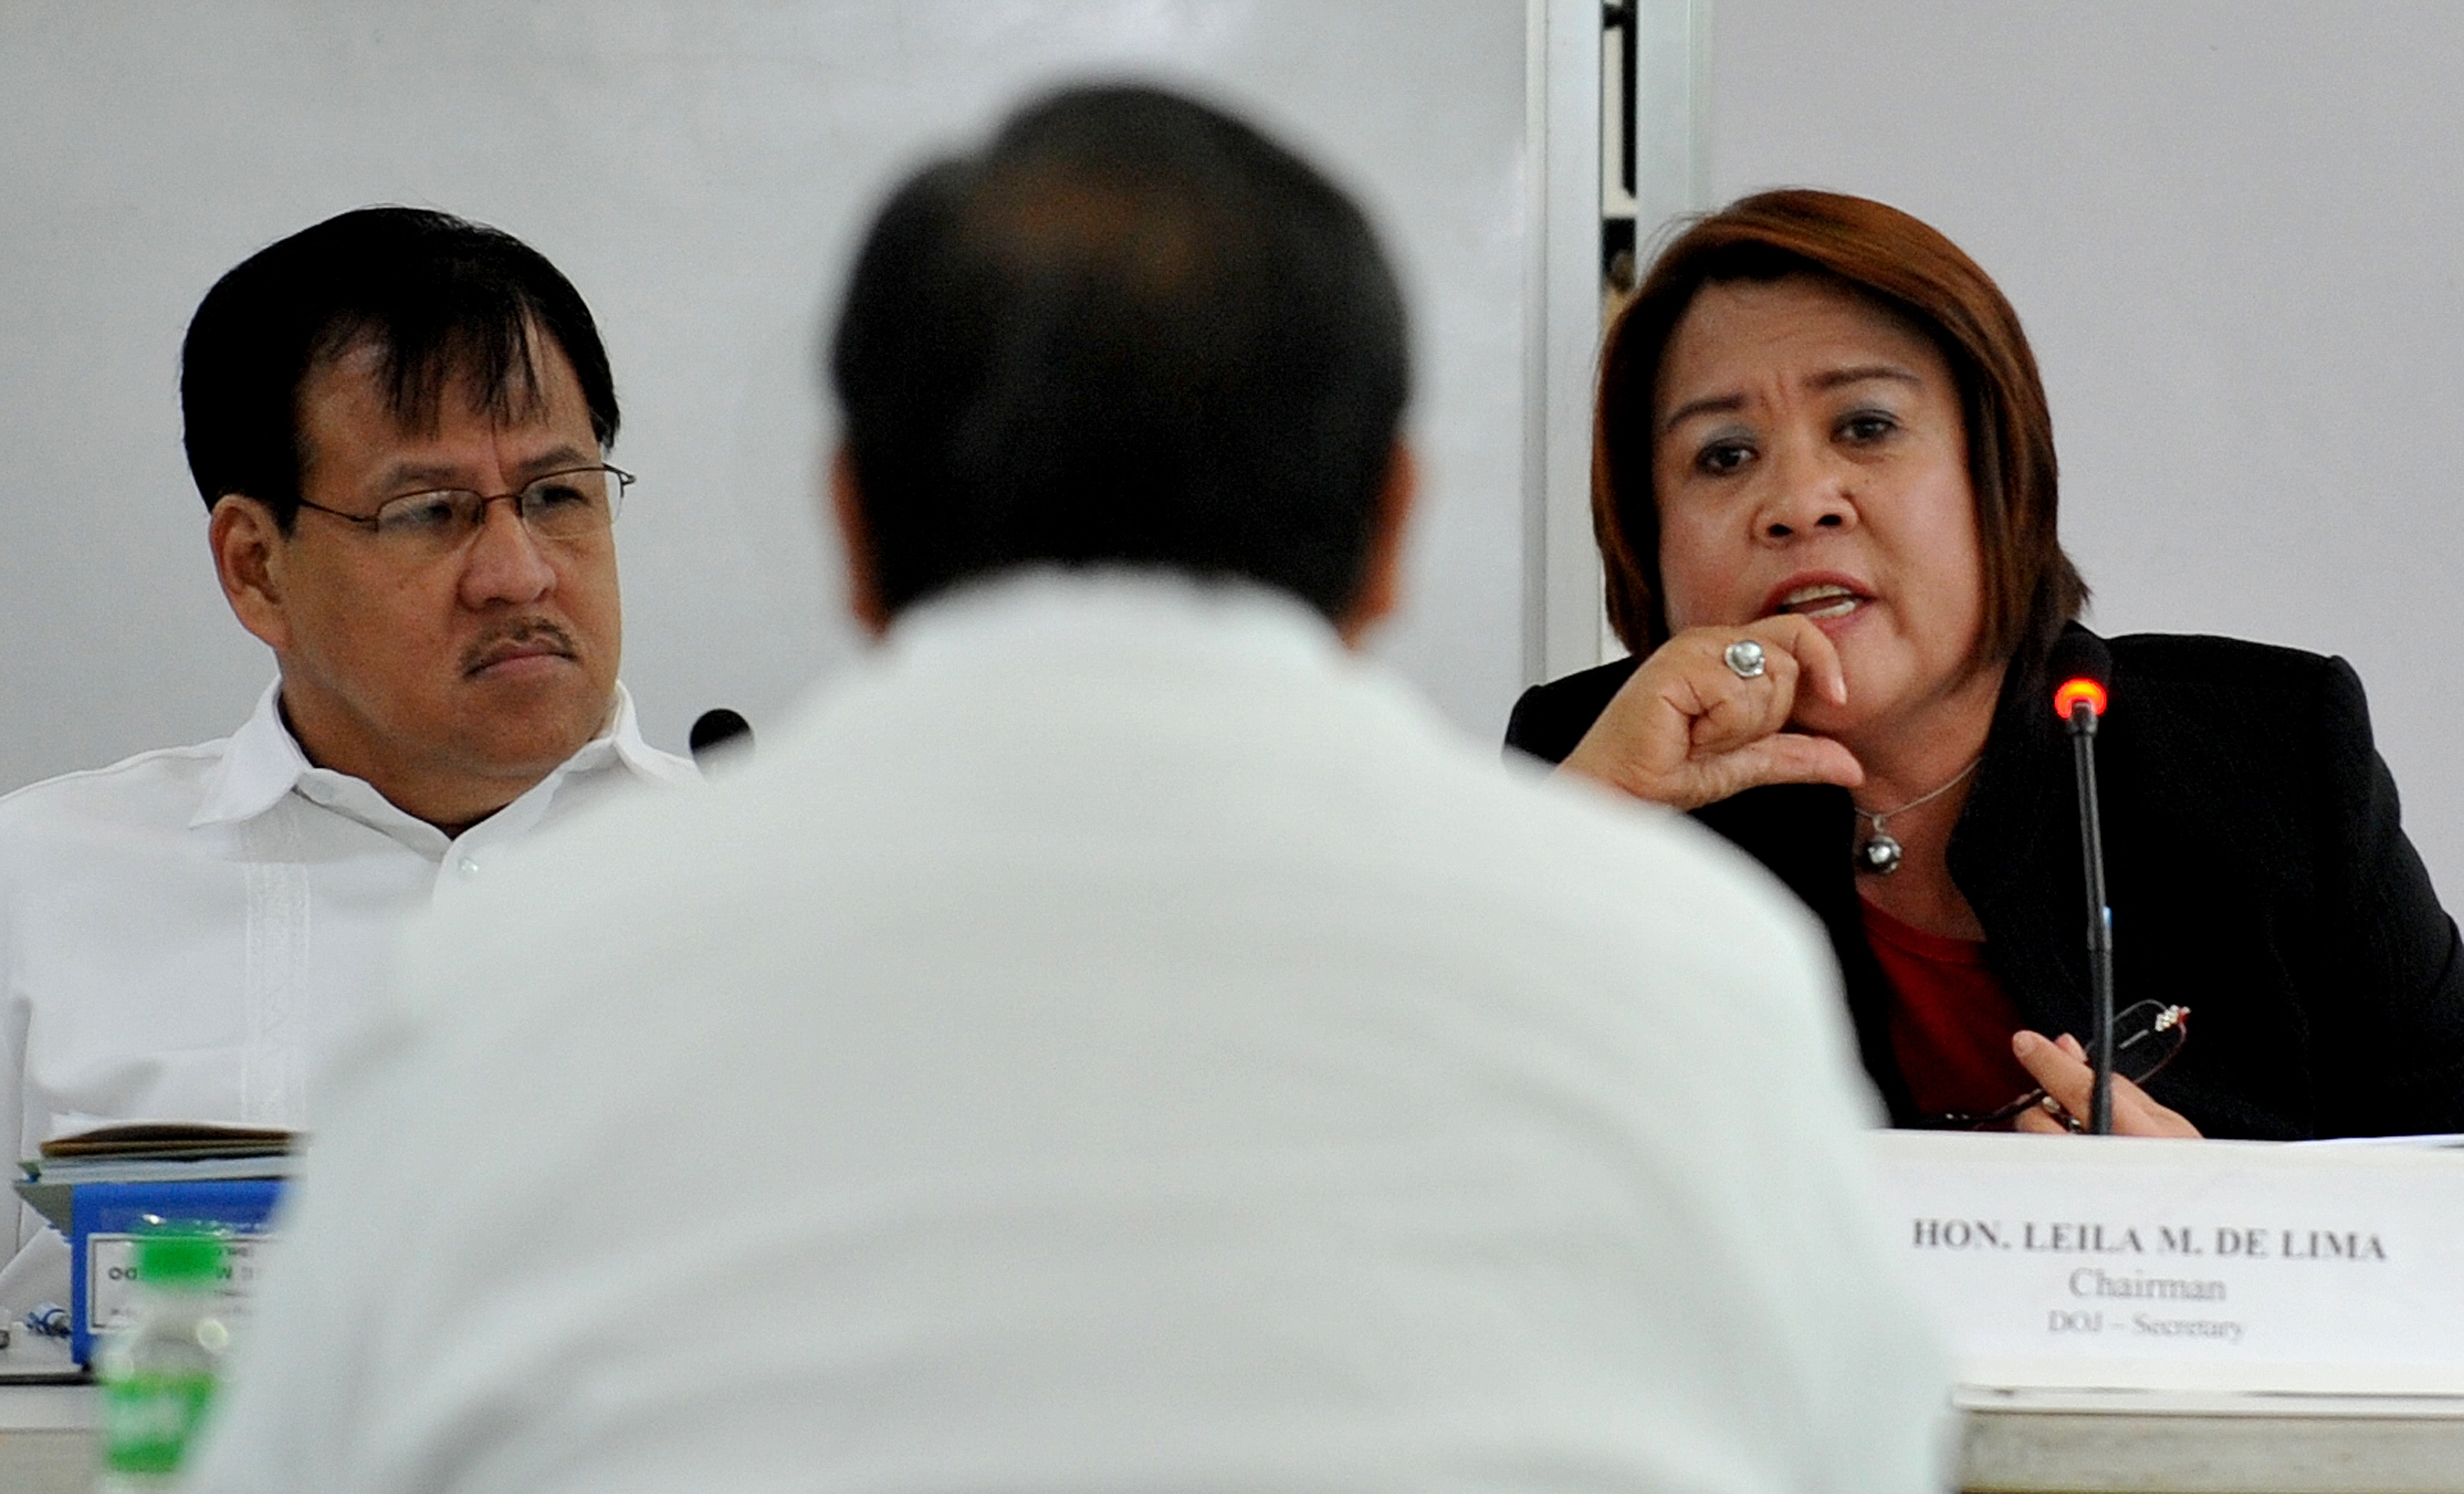 Leila de Lima, right, as a freshly appointed Justice Secretary, chairs a hearing on Sept. 3, 2010, into the Manila hostage crisis that saw eight Hong Kong tourists killed (AFP/Getty Images)